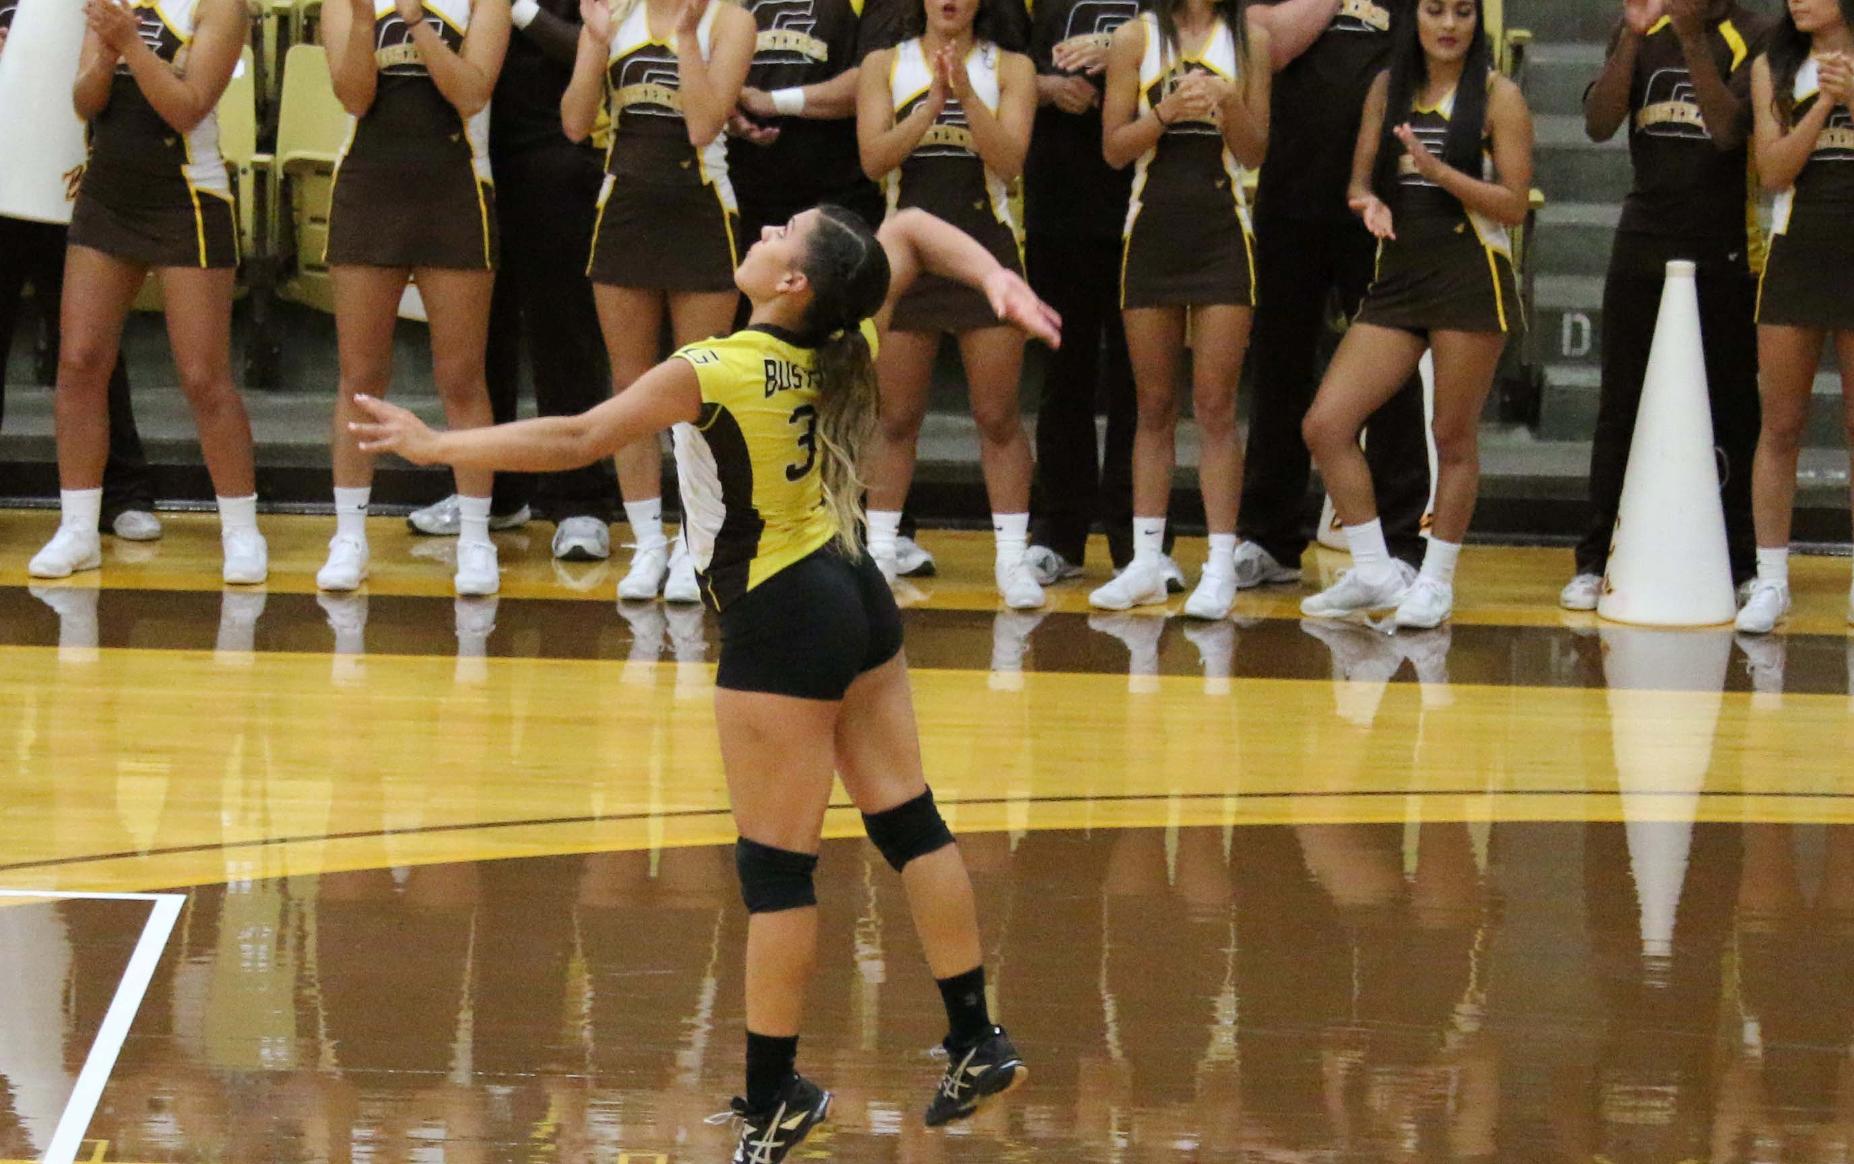 Broncbusters fall in three sets to Colby